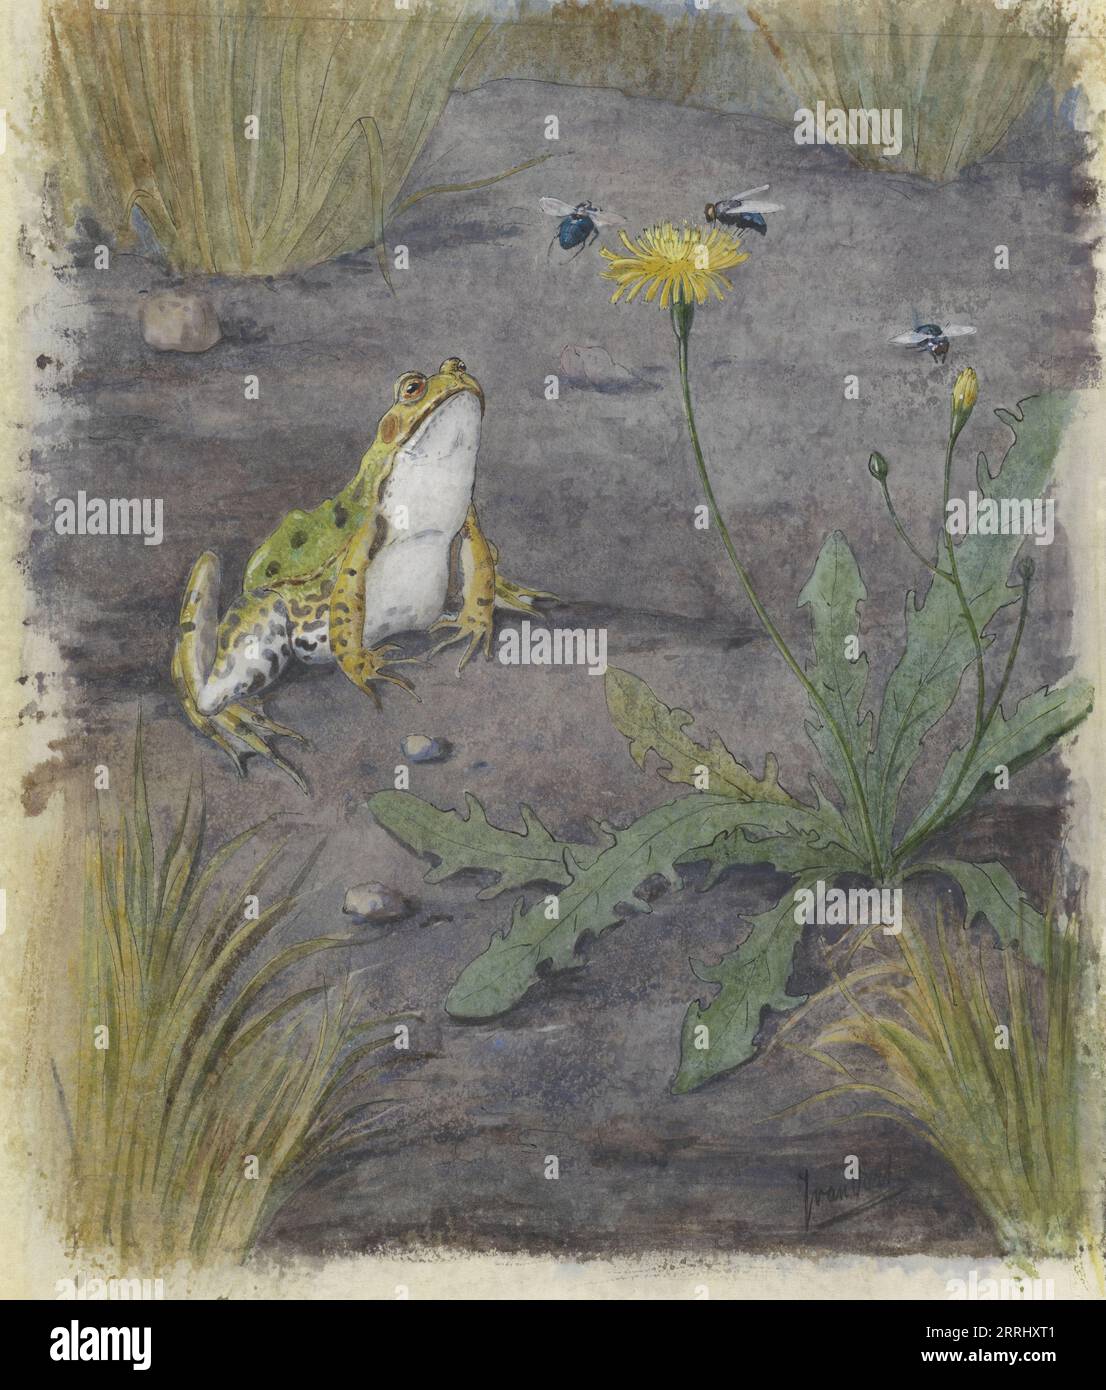 Frog by a Dandelion with Fly, c.1877-c.1938. Foto Stock